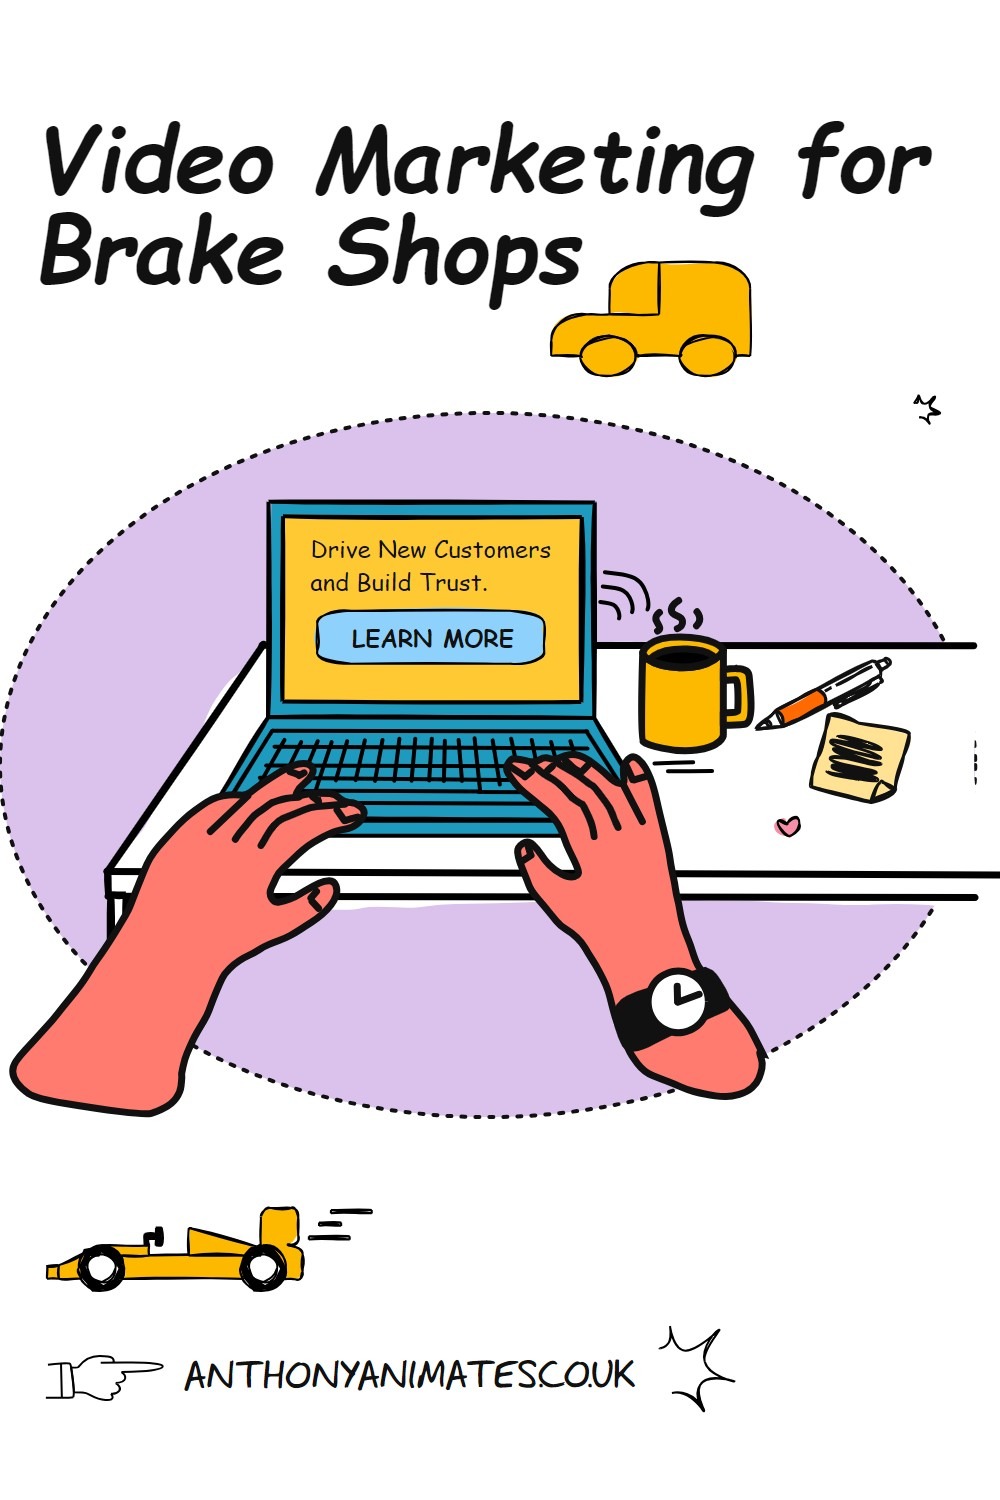 Video Marketing for Brake Shops - Drive New Customers and Build Trust